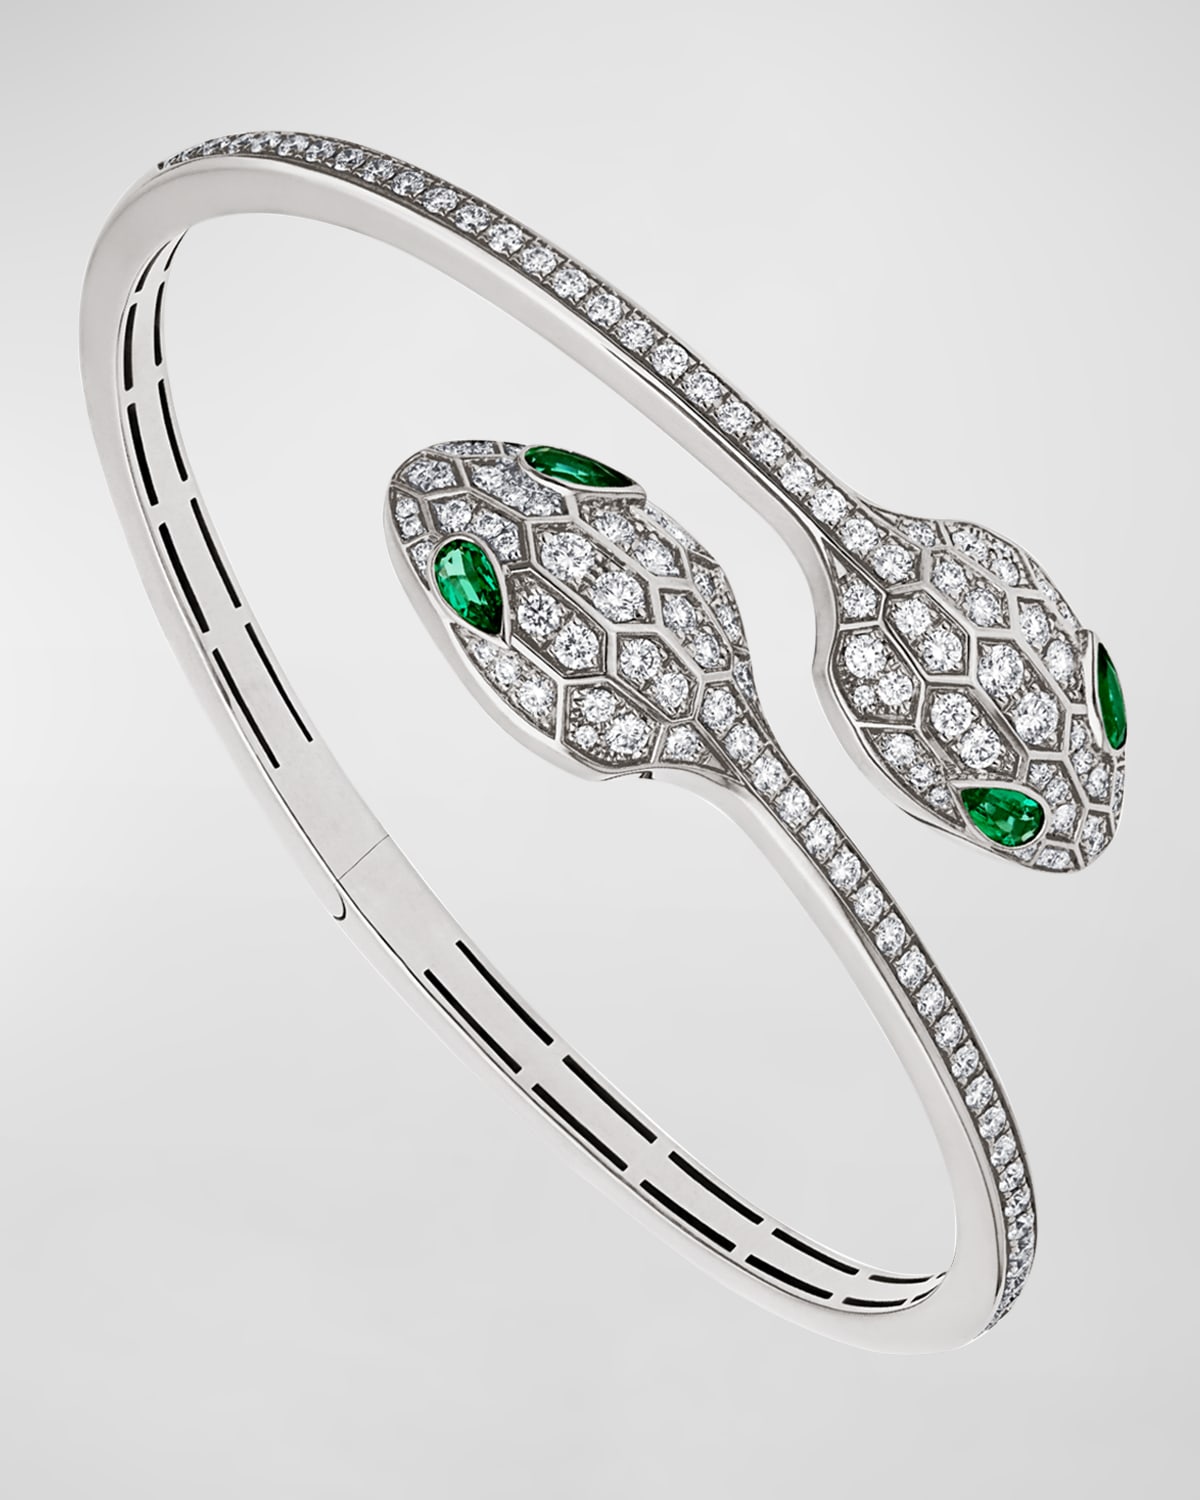 Serpenti Bypass Bracelet in 18k White Gold and Diamonds, Size S